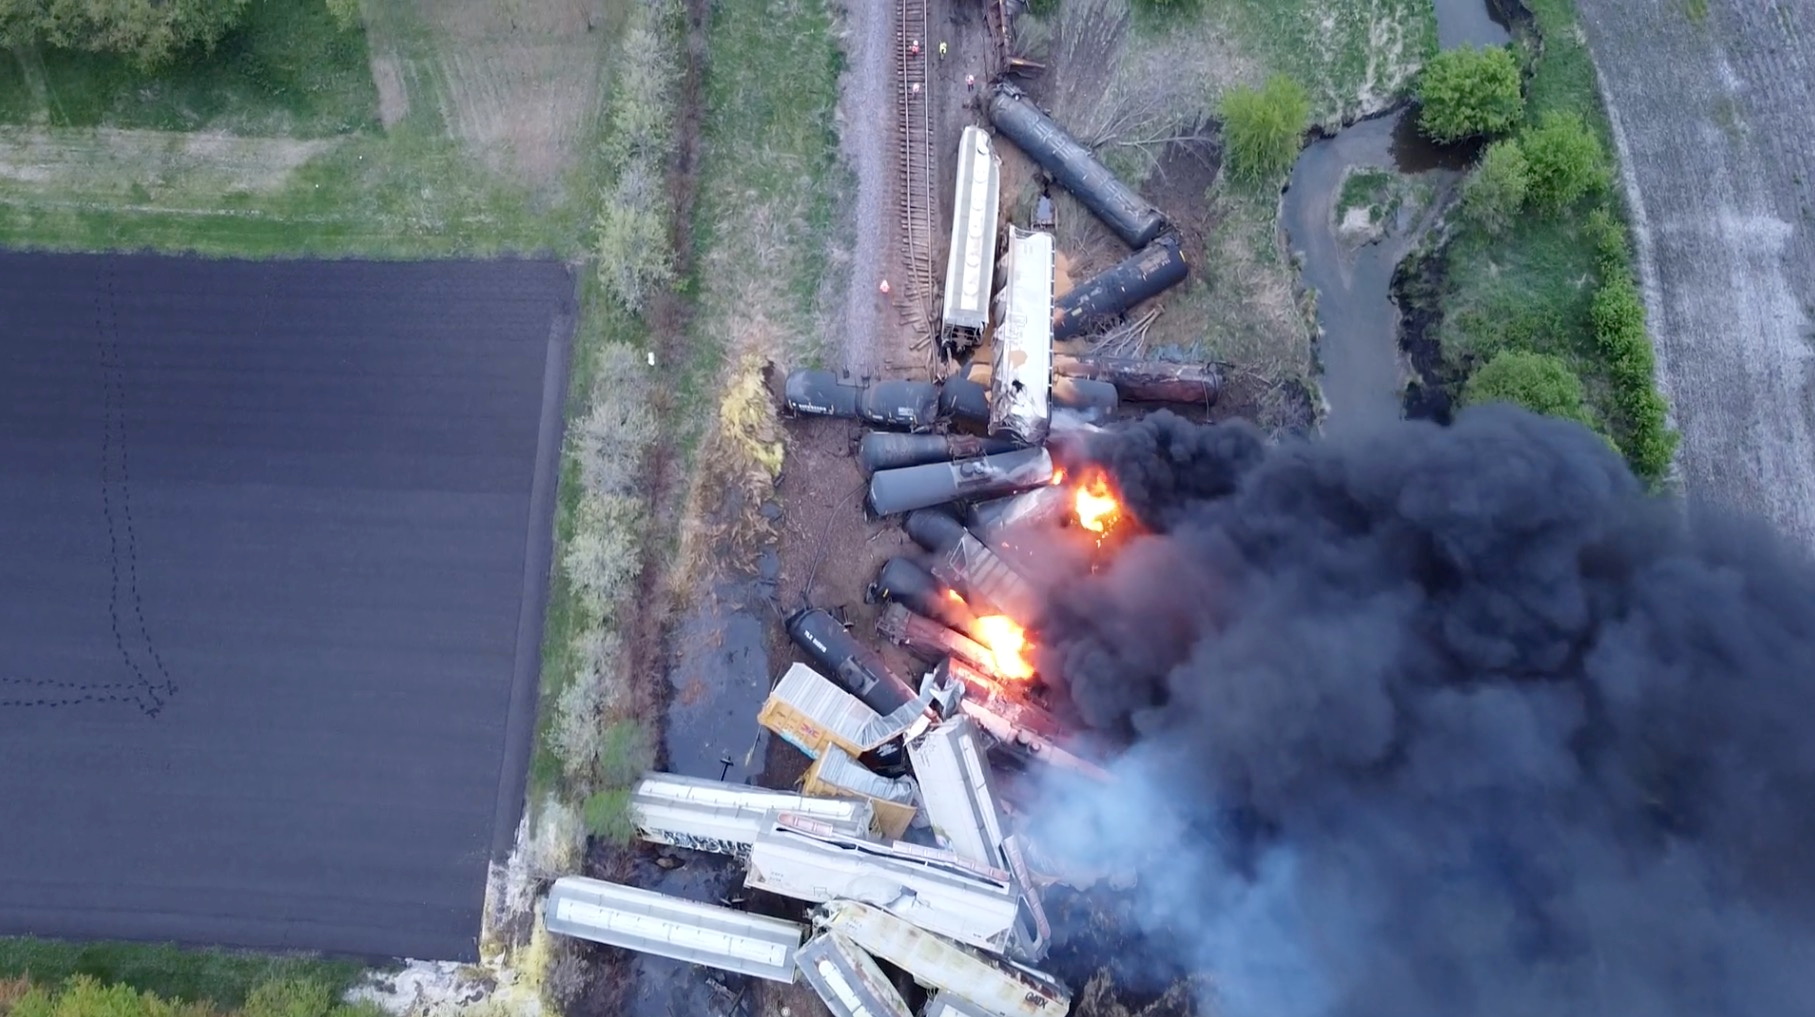 Fire is seen on a Union Pacific train carrying hazardous material that has derailed in Sibley, Iowa, U.S., in this still frame obtained from social media drone video dated May 16, 2021. NATHAN MINTEN/via REUTERS  